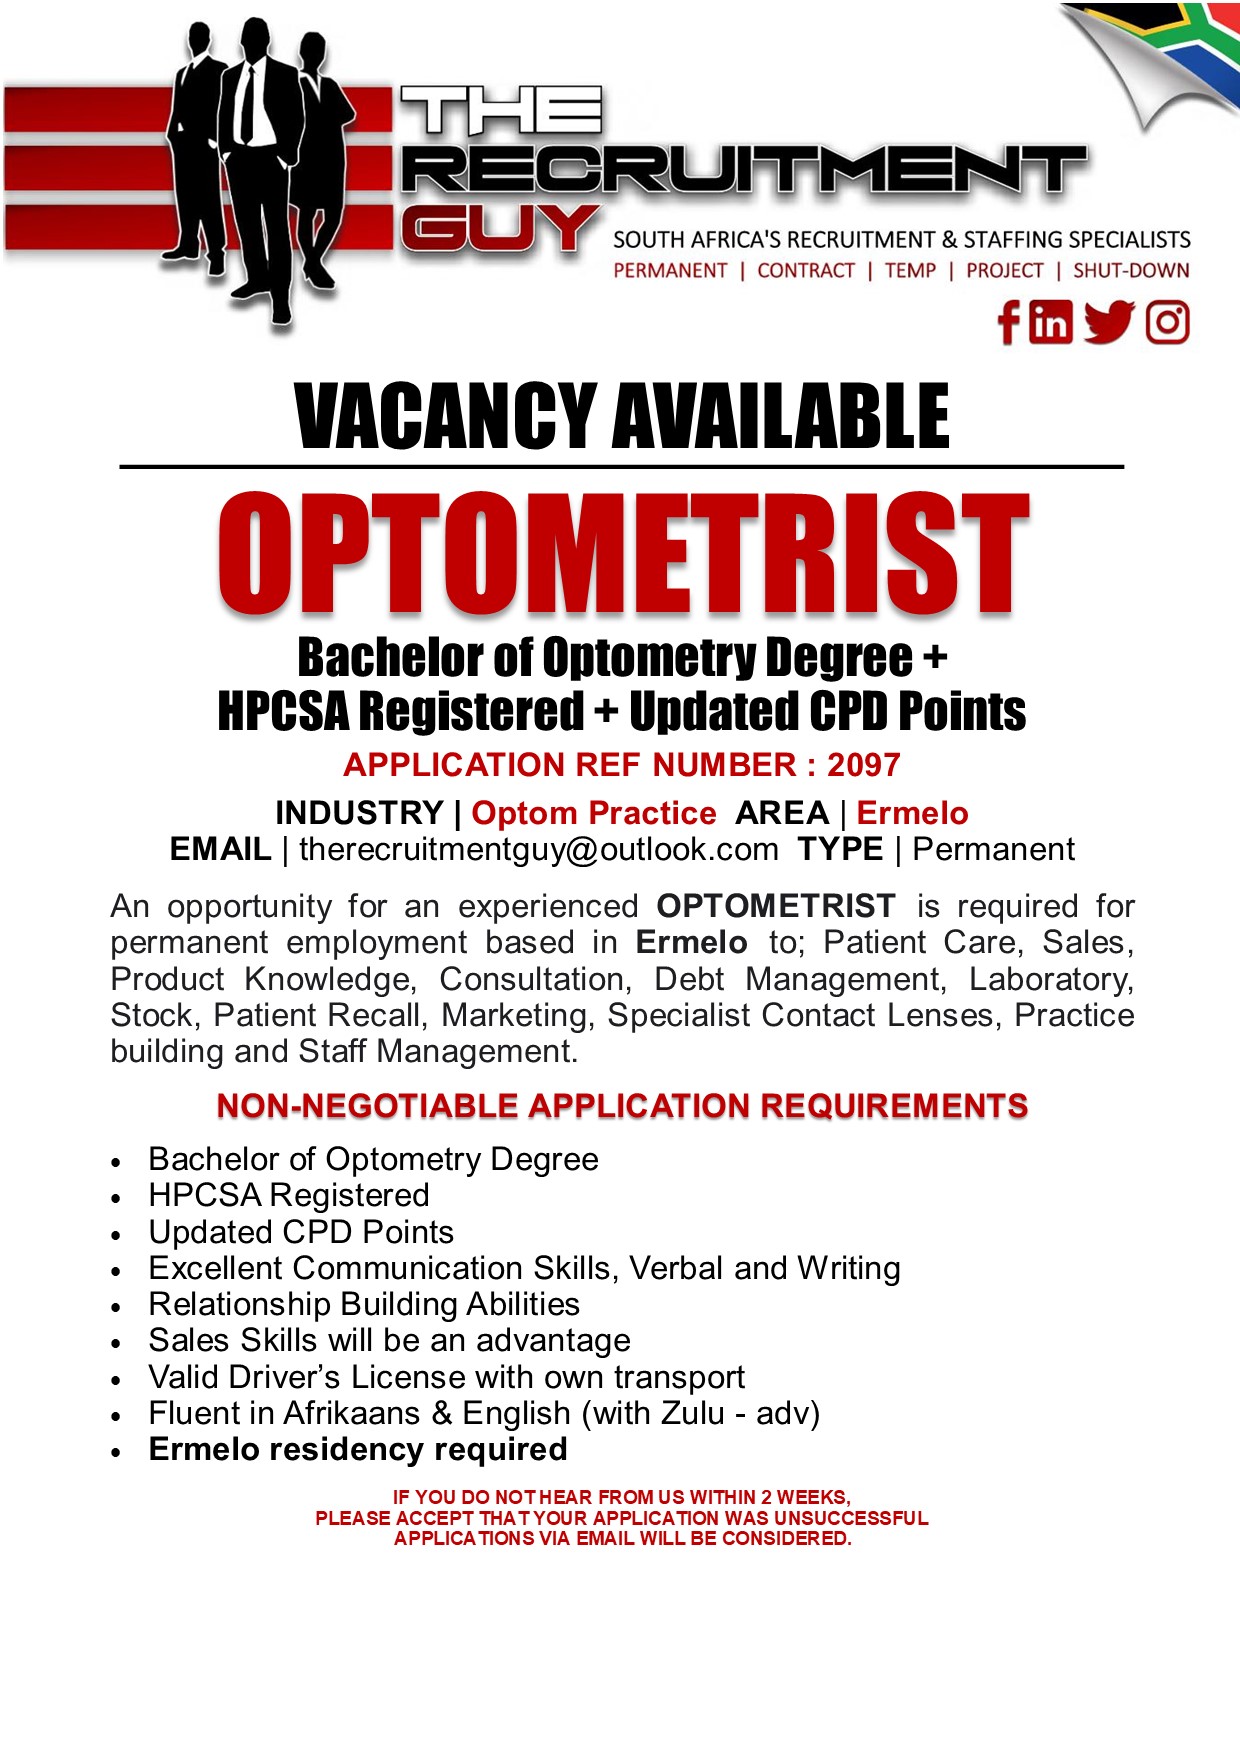 GUY SOUTH AFRICA'S RECRUITMENT & STAFFING SPECIALISTS

PERMANENT | CONTRACT | TEMP | PROJECT | SHUT-DOWN

{ink JG]

 

VACANCY AVAILABLE

OPTOMETRIST

Bachelor of Optometry Degree =
HPCSA Registered + Updated CPD Points

APPLICATION REF NUMBER : 2097

INDUSTRY | Optom Practice AREA | Ermelo
EMAIL | therecruitmentguy@outlook.com TYPE | Permanent

An opportunity for an experienced OPTOMETRIST is required for
permanent employment based in Ermelo to; Patient Care, Sales,
Product Knowledge, Consultation, Debt Management, Laboratory,
Stock, Patient Recall, Marketing, Specialist Contact Lenses, Practice
building and Staff Management.

NON-NEGOTIABLE APPLICATION REQUIREMENTS

Bachelor of Optometry Degree

HPCSA Registered

Updated CPD Points

Excellent Communication Skills, Verbal and Writing
Relationship Building Abilities

Sales Skills will be an advantage

Valid Driver's License with own transport

Fluent in Afrikaans & English (with Zulu - adv)
Ermelo residency required

IF YOU DO NOTHEAR FROM US WITHIN 2 WEEKS,
PLEASE ACCEPT THAT YOUR APPLICATION WAS UNSUCCESSFUL
APPLICATIONS VIA EMAIL WILL BE CONSIDERED.